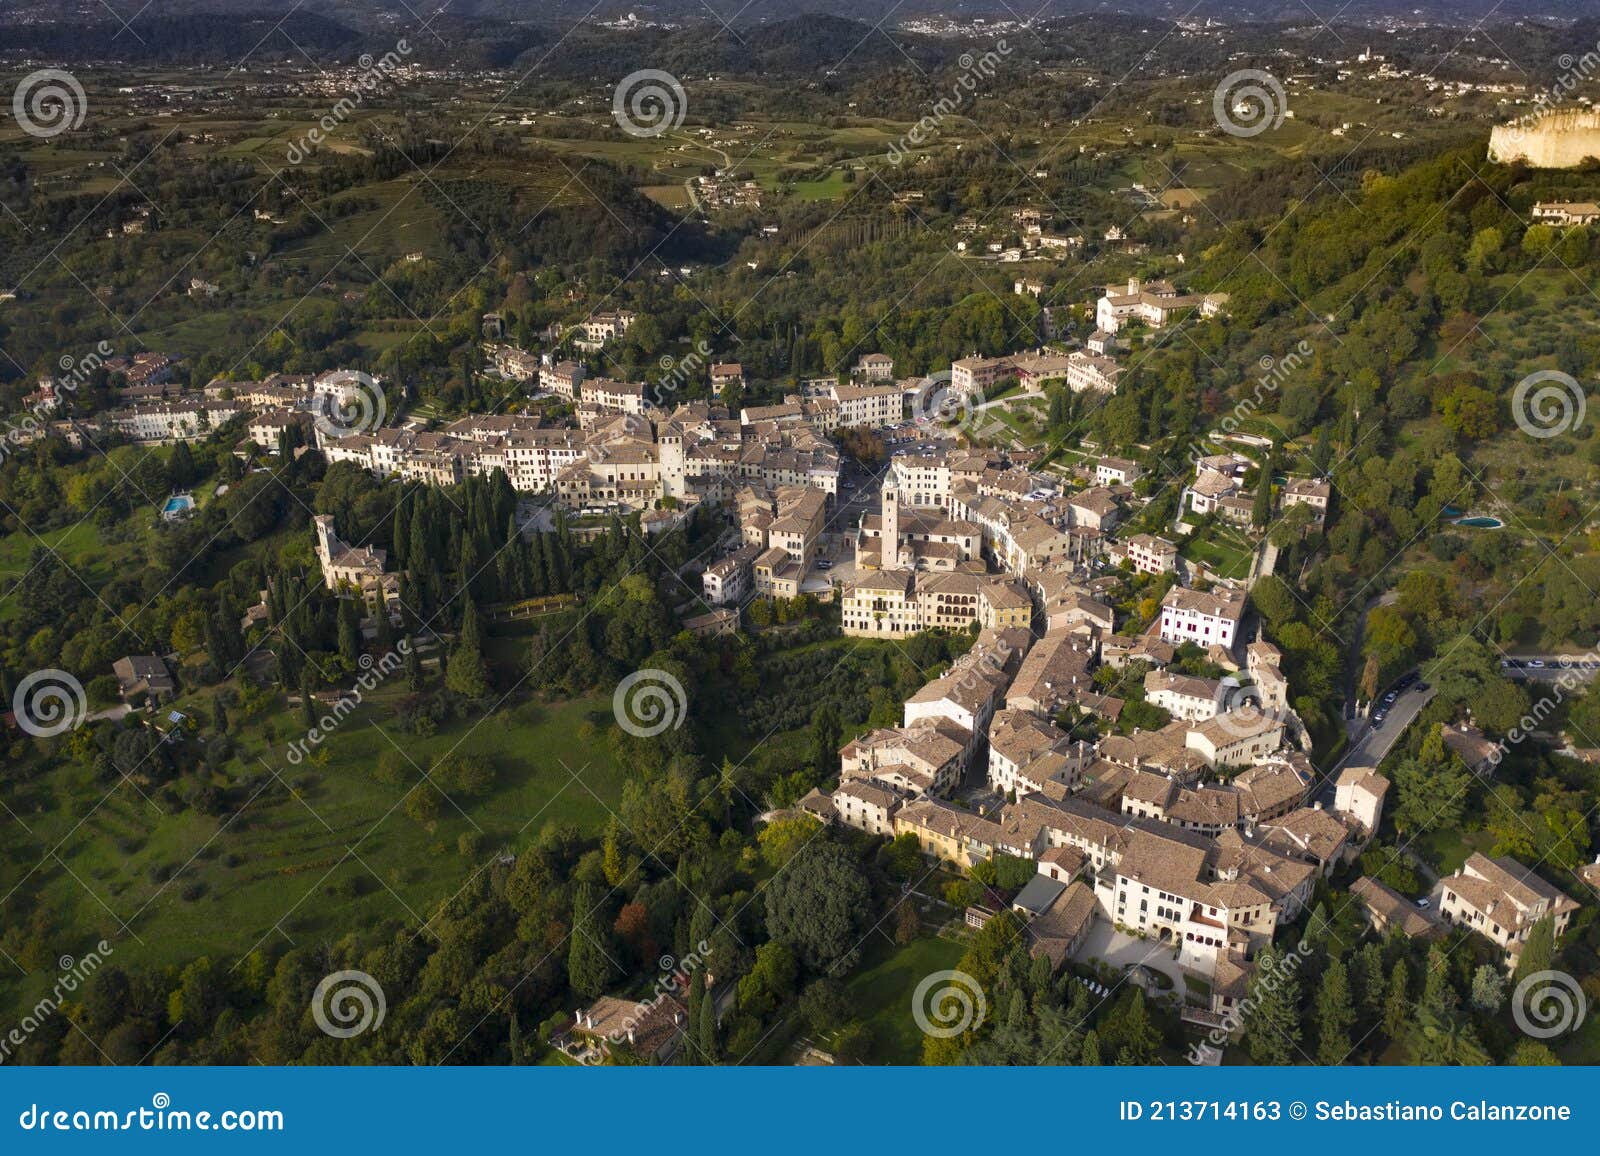 asolo village in a panoramic view from above